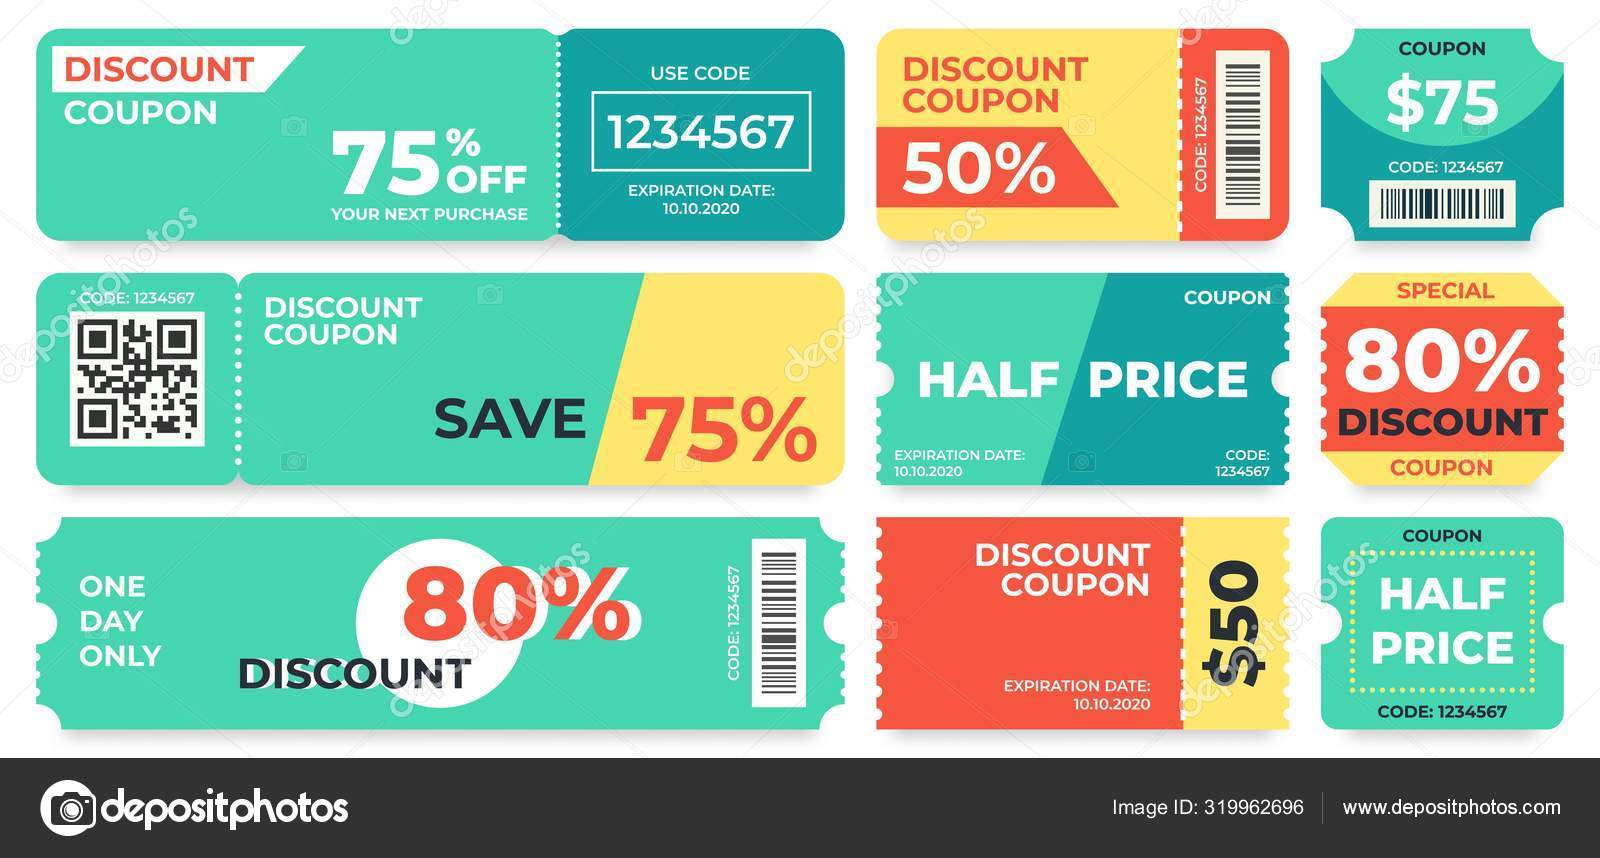 Premium Vector  Coupon mockup with 50 percent off discount